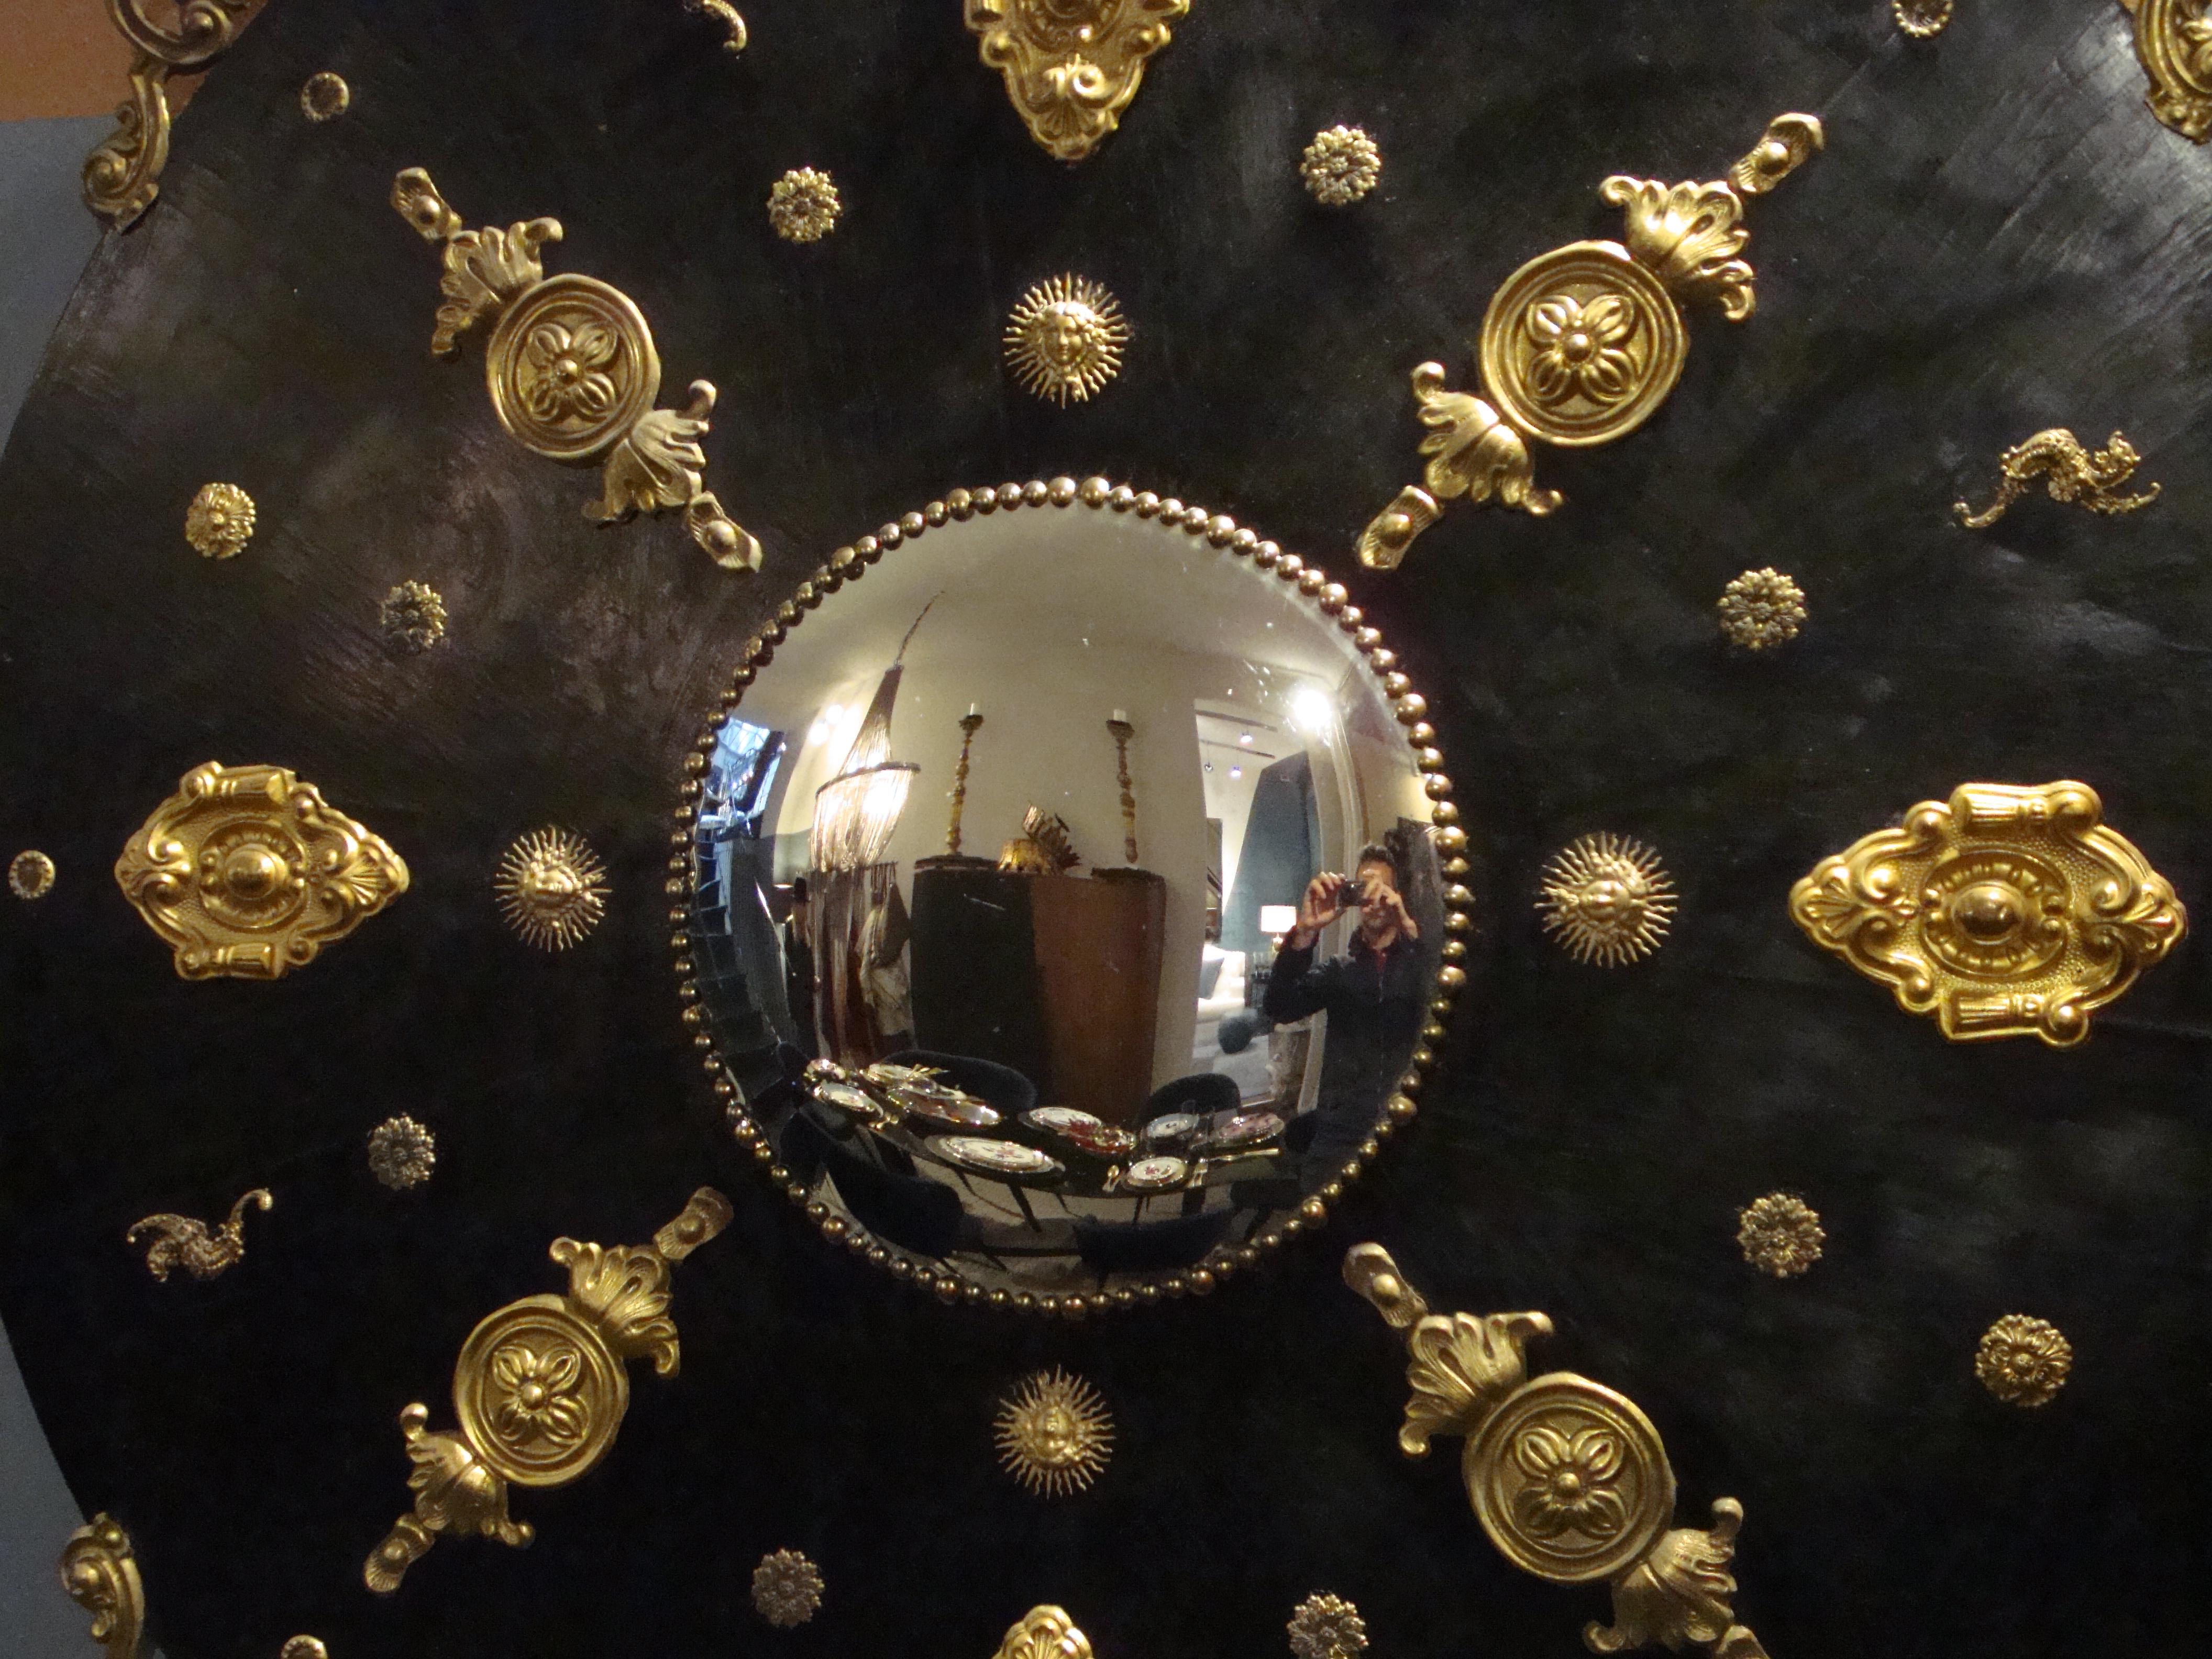 Large round late 19th century decorative black lacquered wood convex mirror, the frame with brass friezes applied
Measures: diameter 113cm, diameter mirror 33cm.